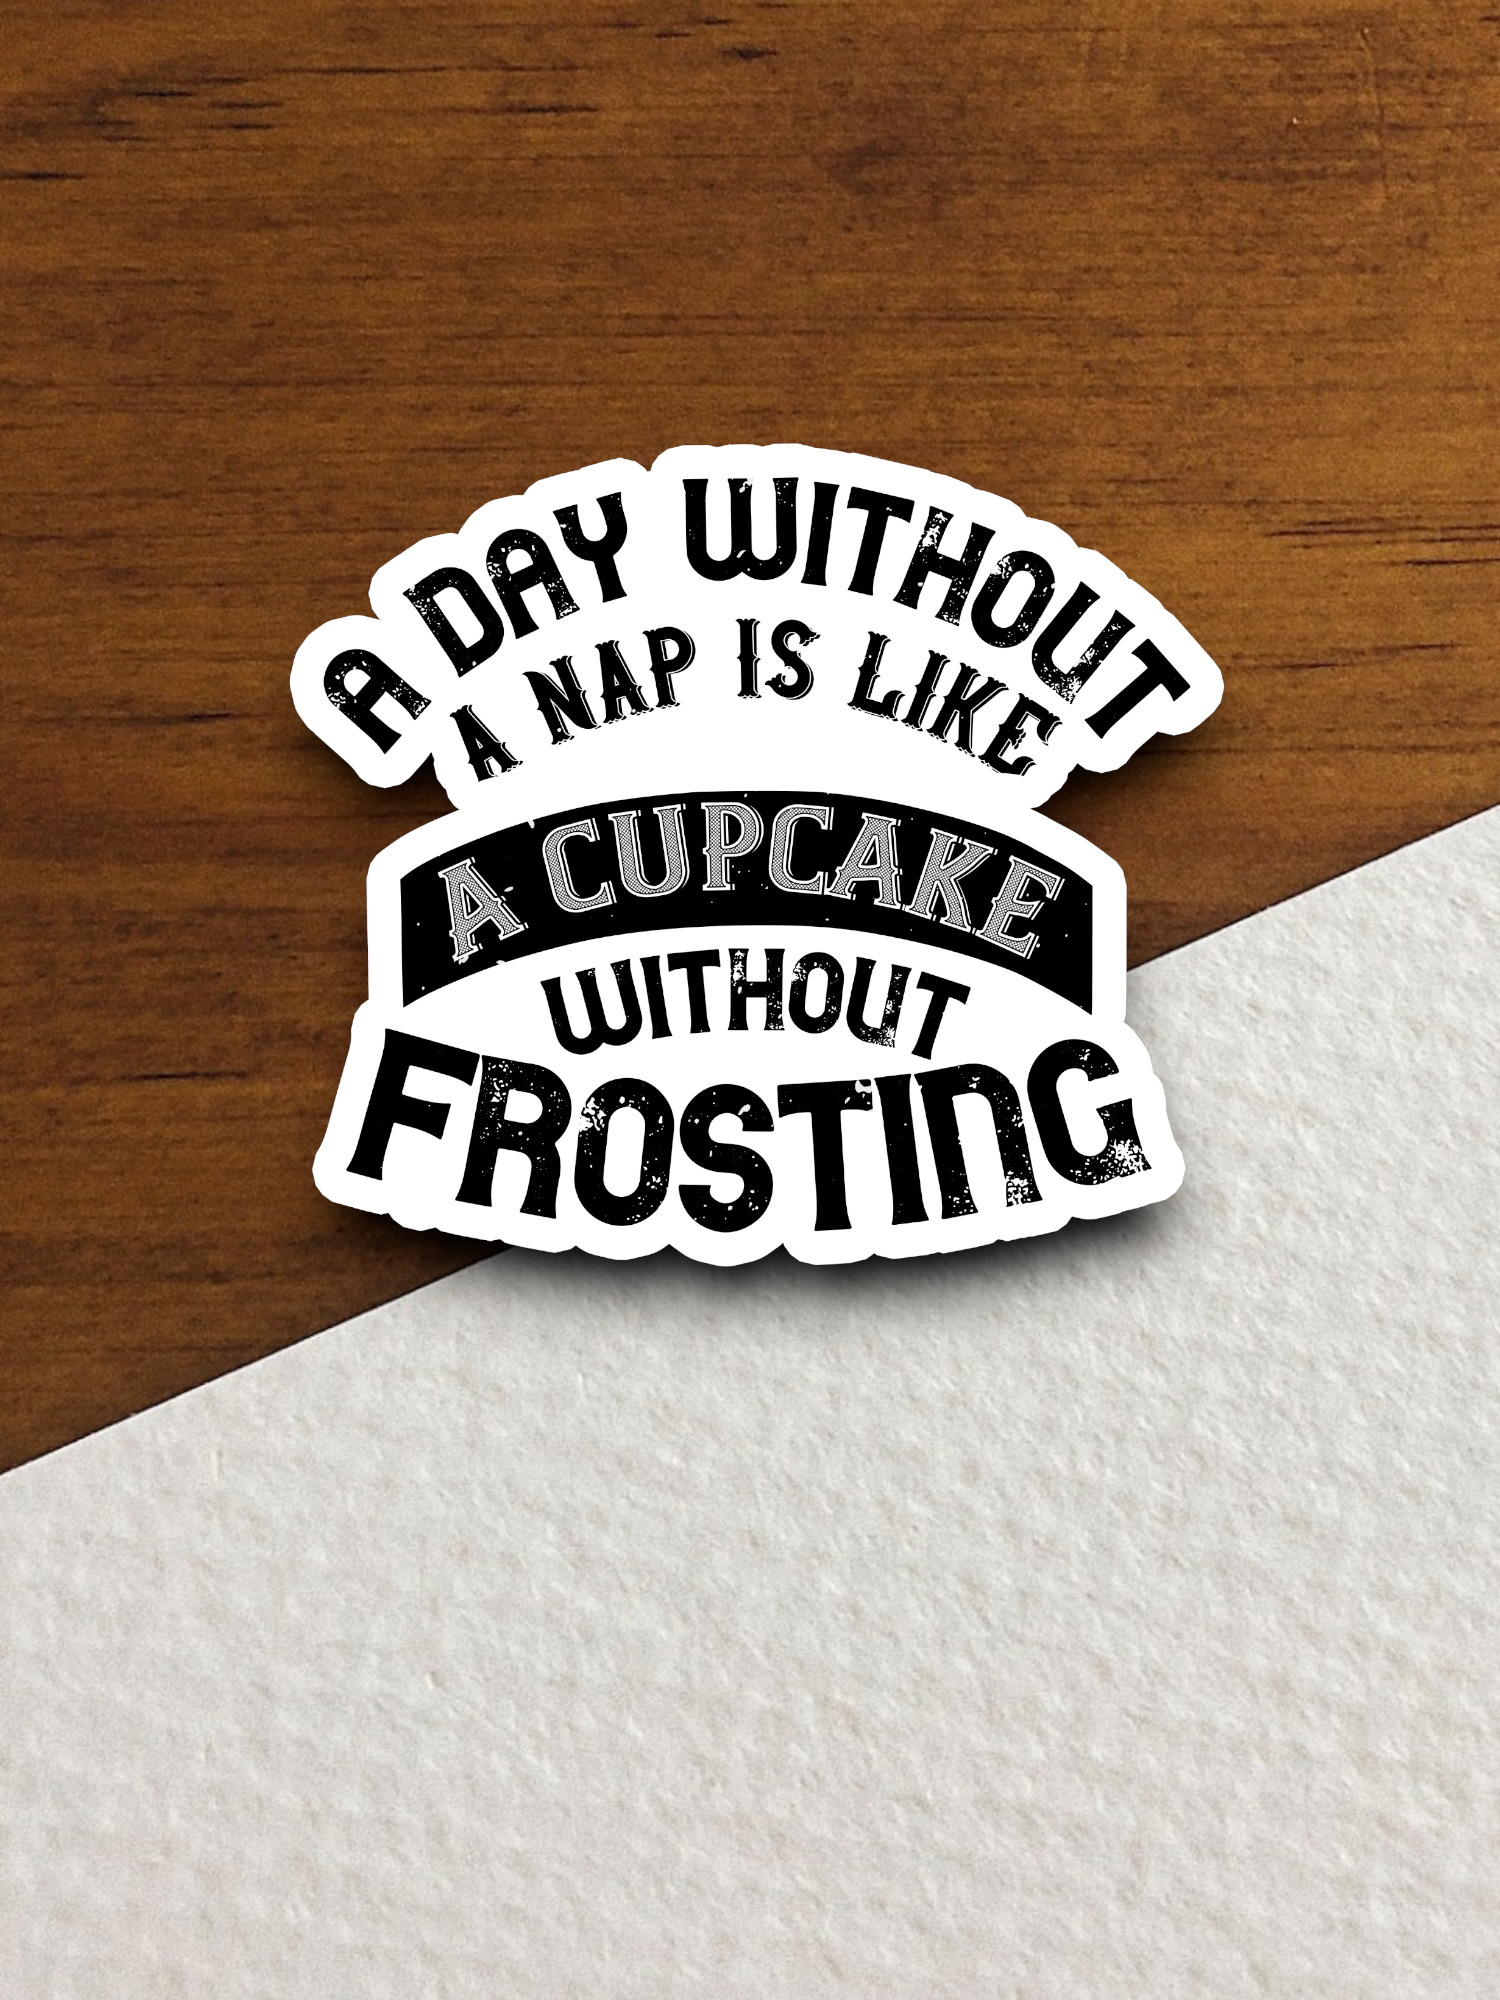 A Day Without A Nap Is Like a Cupcake Without Frosting Sticker